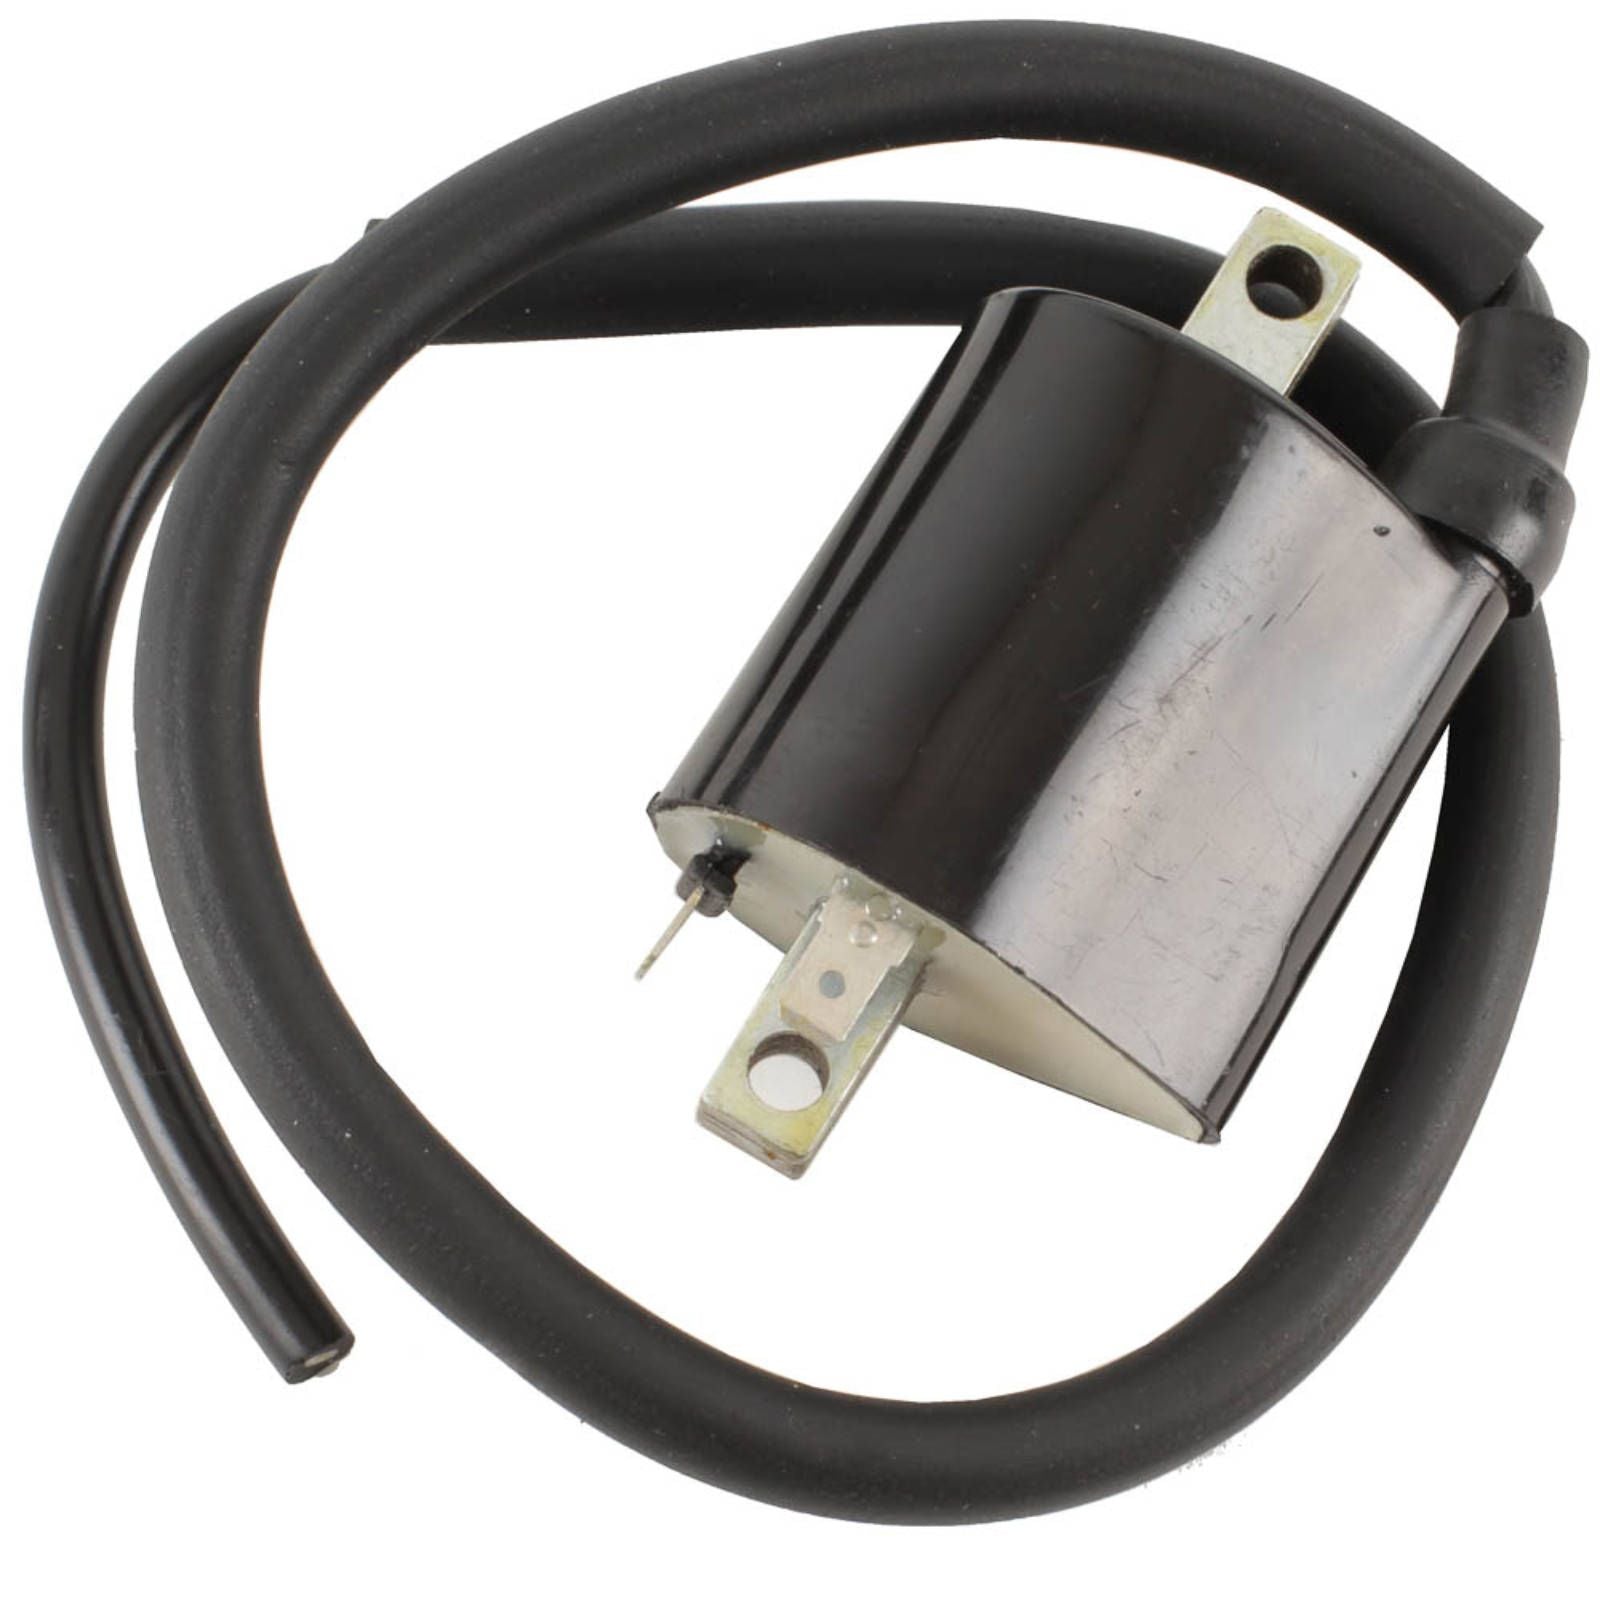 New WHITES Electrical Ignition Coil 12V #WPELC04120134